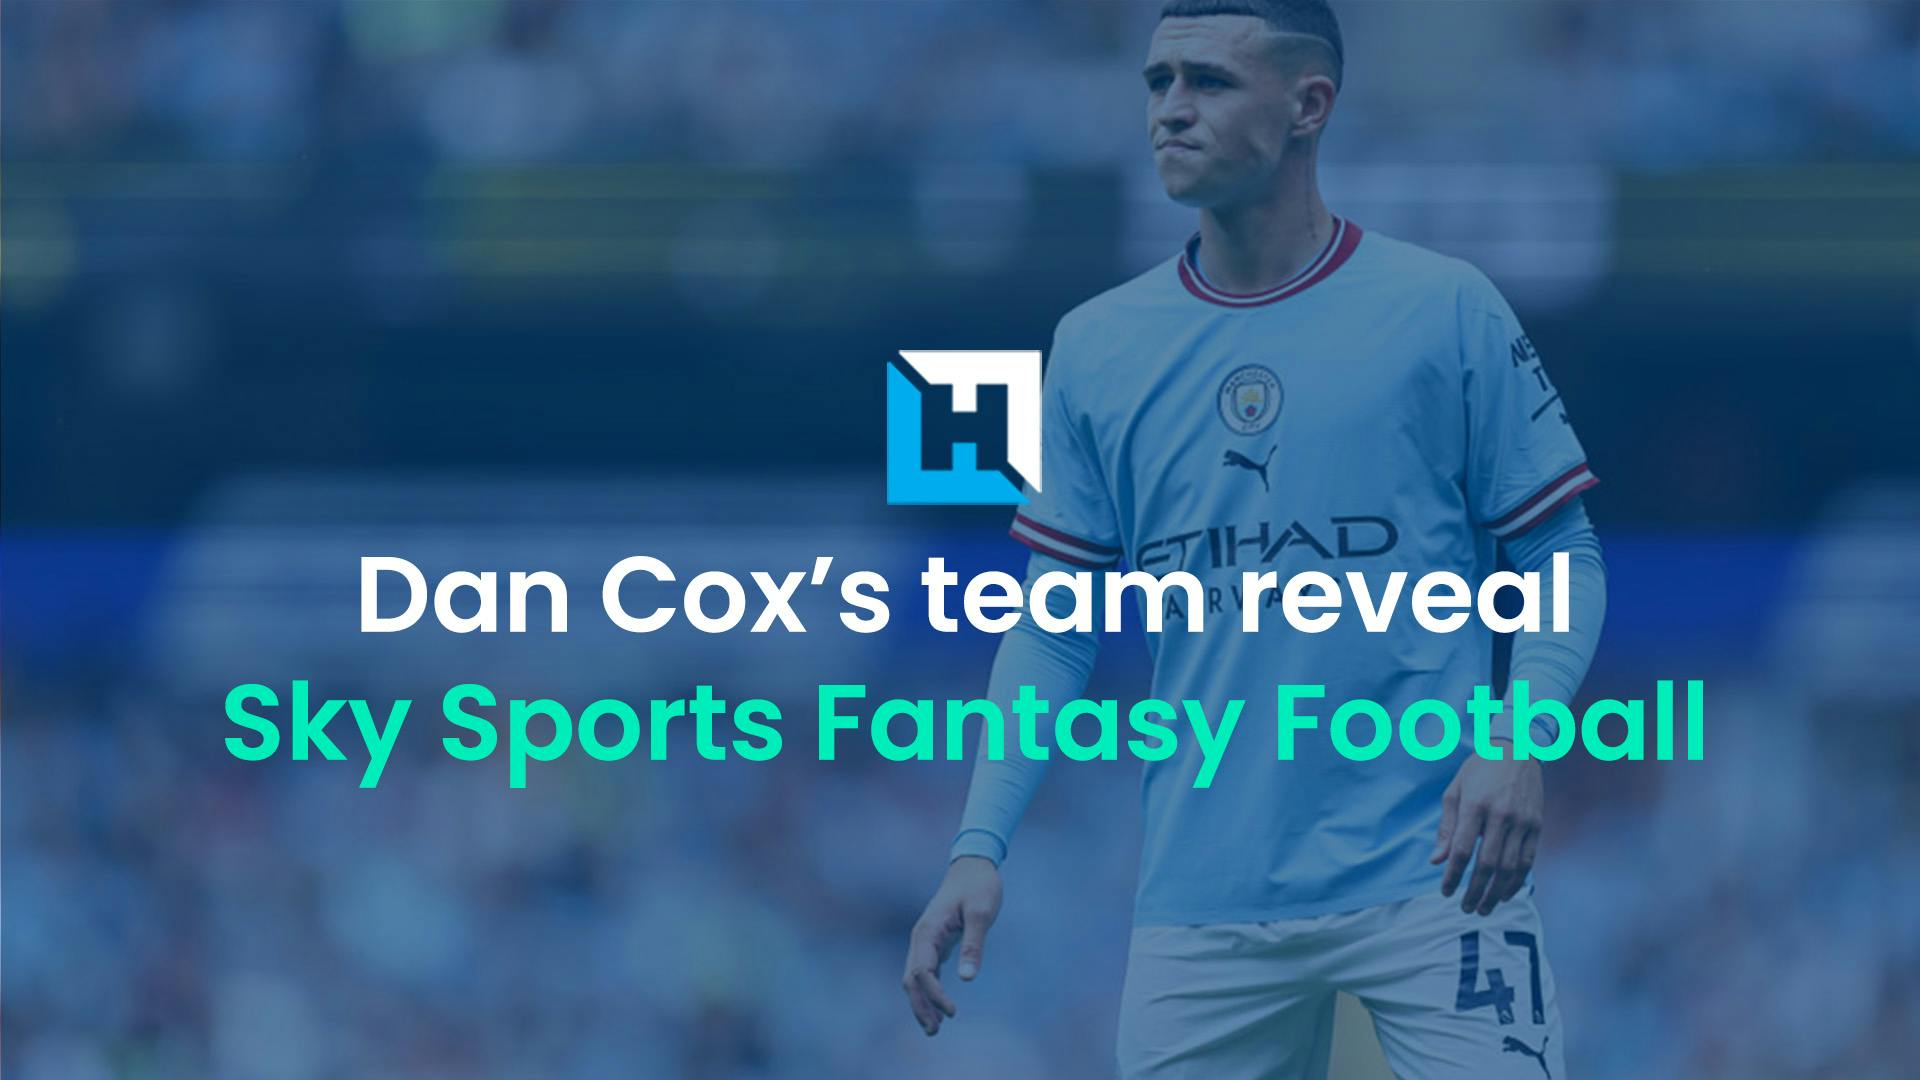 Dan Cox’s Sky Sports Fantasy Football Gameweek 23 and 24 preview and team reveal